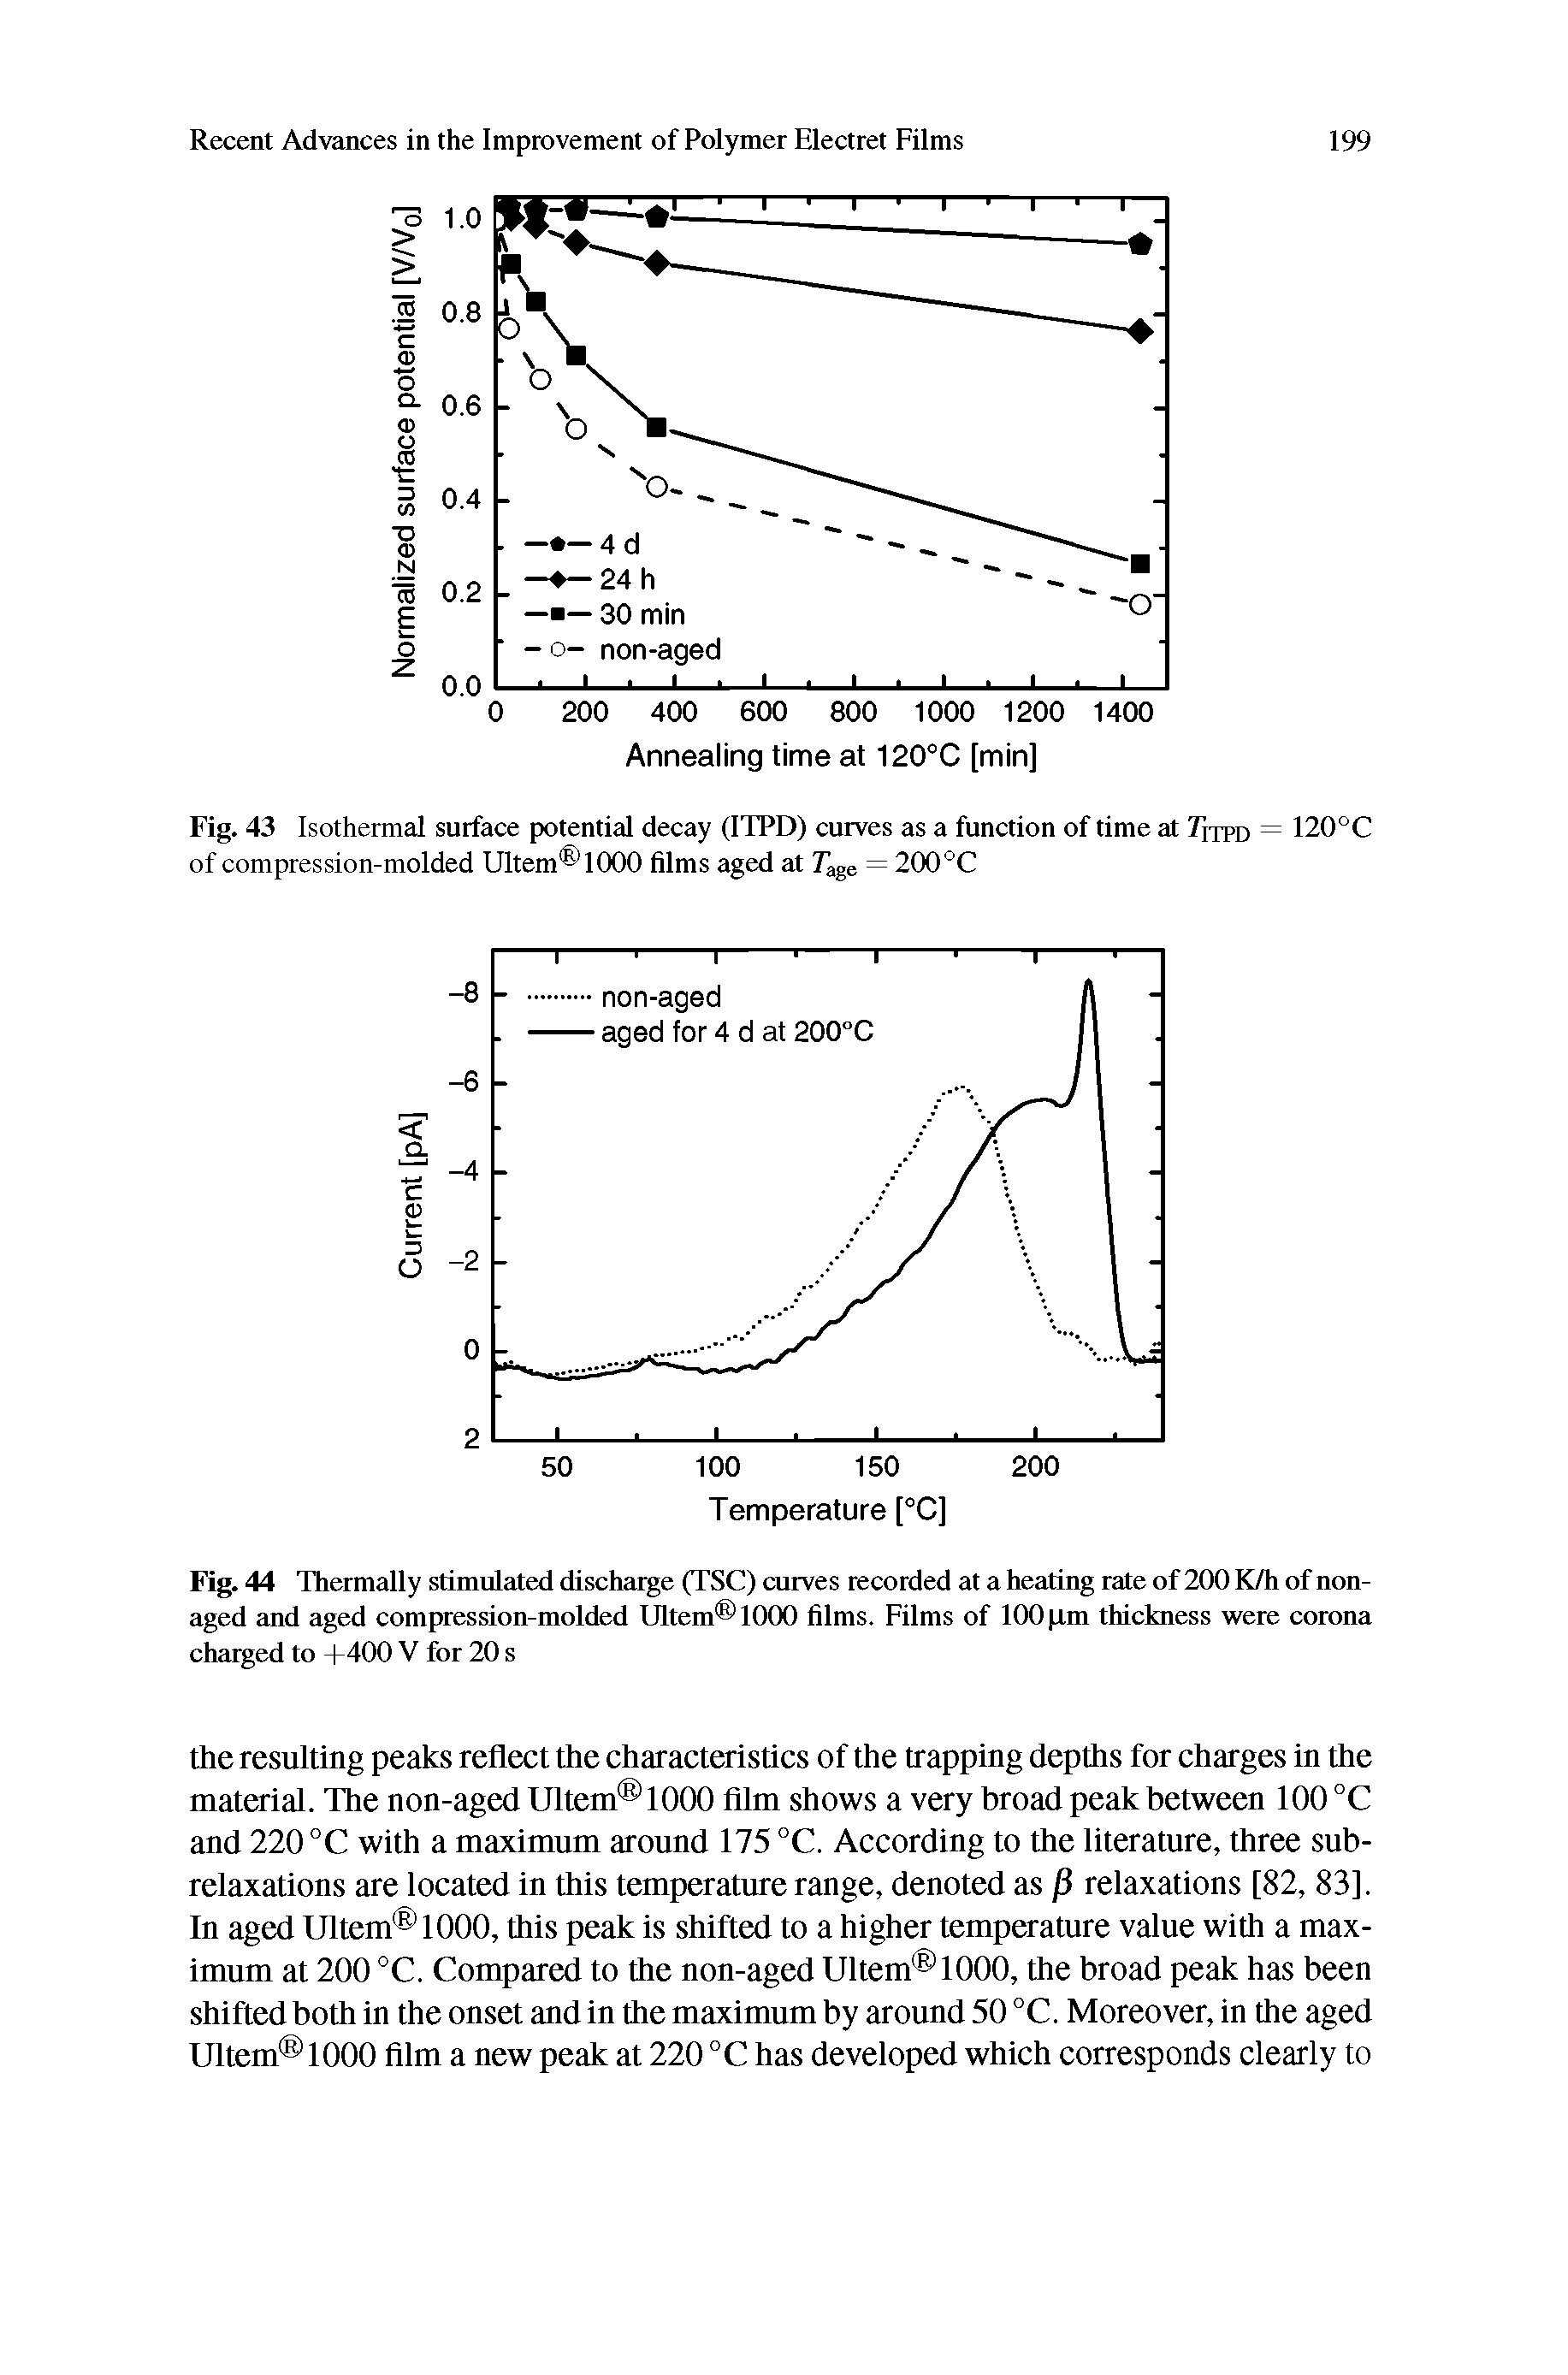 Fig. 44 Thermally stimulated discharge (TSC) curves recorded at a heating rate of200 K/h of nonaged and aged compression-molded Ultem 1000 films. Films of 100 pm thickness were corona charged to +400 V for 20 s...